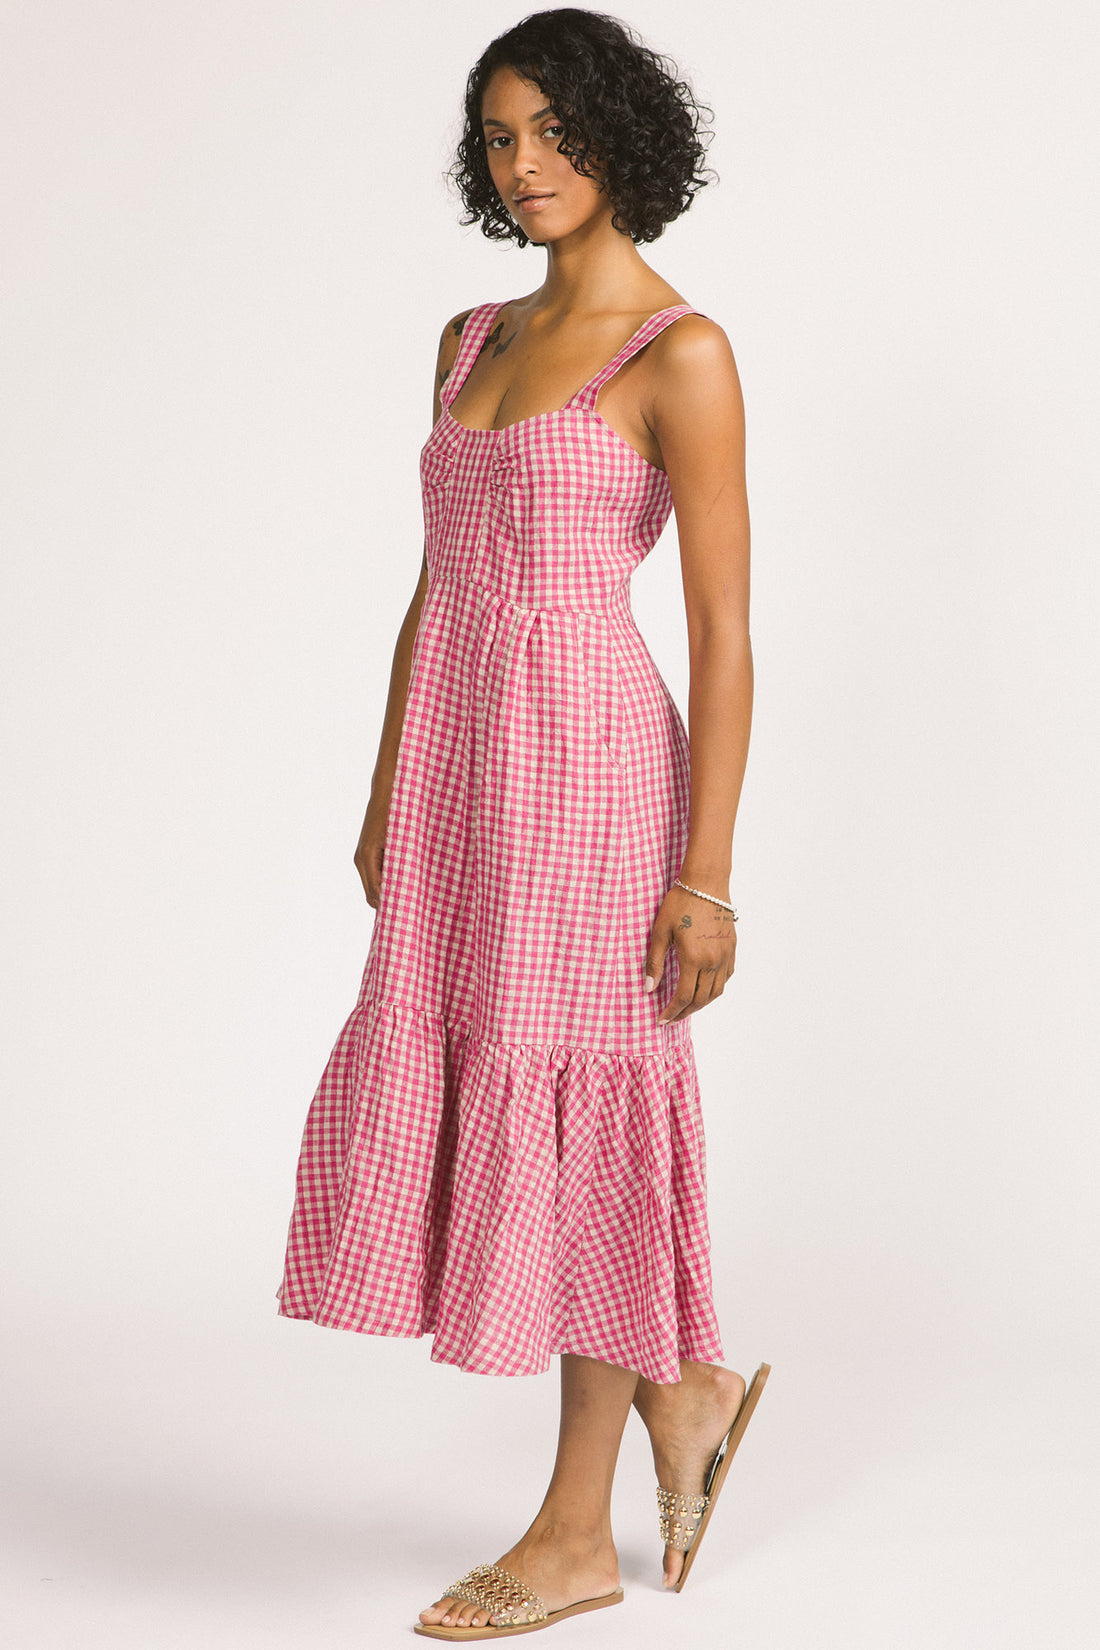 Calista Dress by Allison Wonderland, Pink Gingham, wide straps, sweetheart neckline, gathers at bust and waist, ruffled hem, pockets, 100% linen, sizes 2-12, made in Vancouver